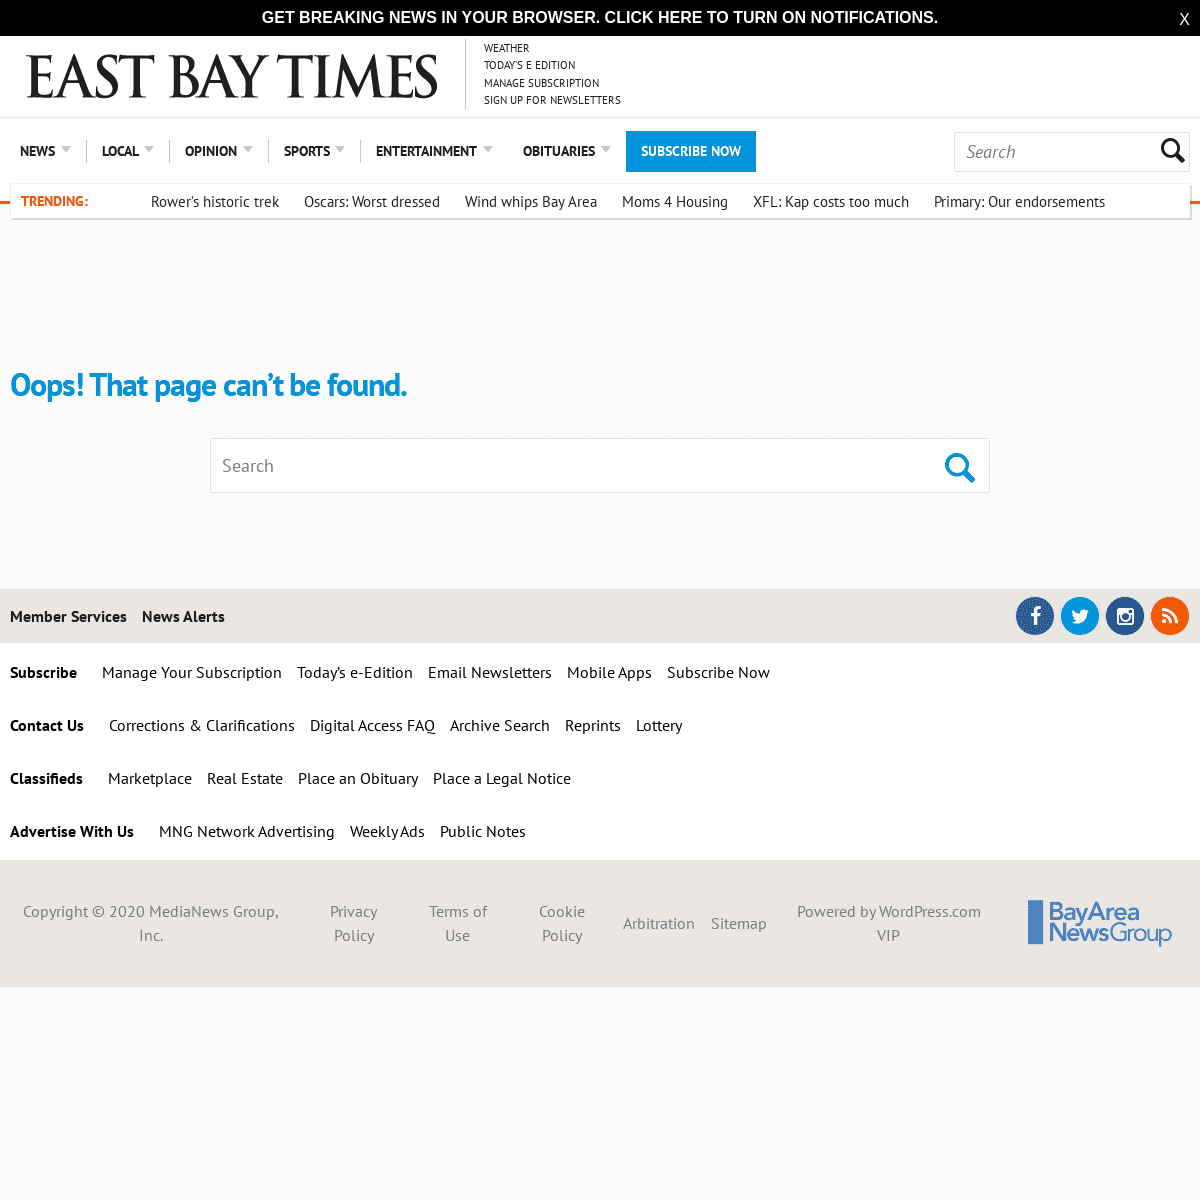 A complete backup of www.eastbaytimes.com/brad-pitt-laura-dern-parasite-win-at-academy-awards